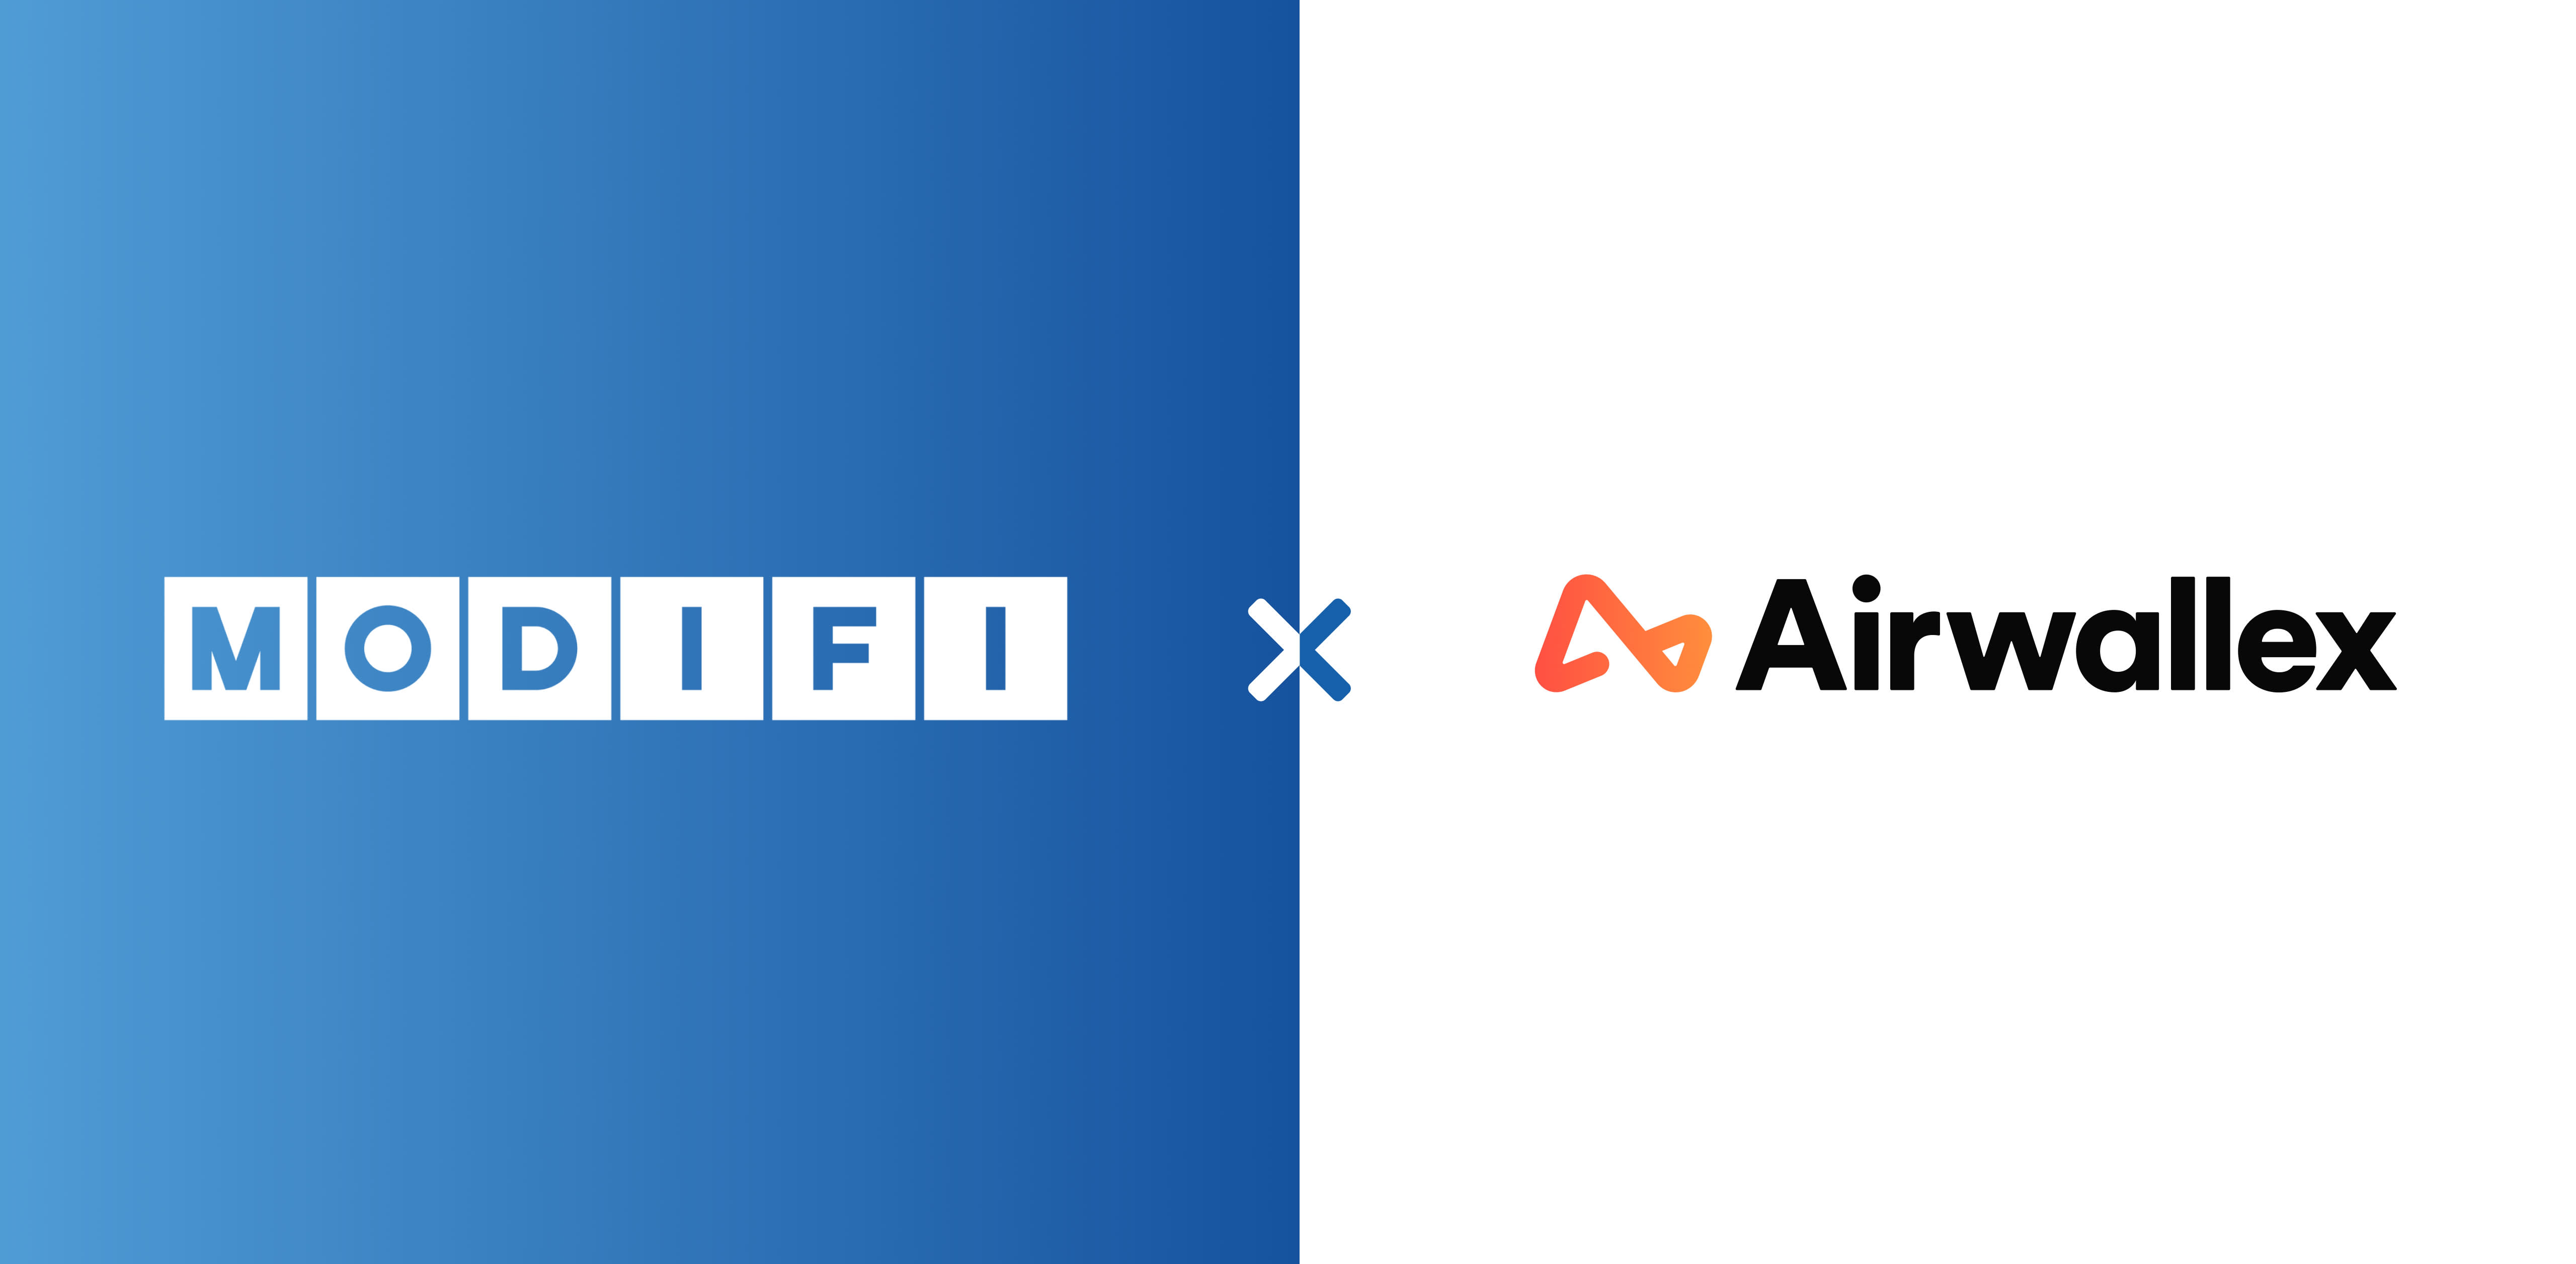 Airwallex partners with MODIFI to launch Global Account Solution for smooth and flexible cross-border B2B payments